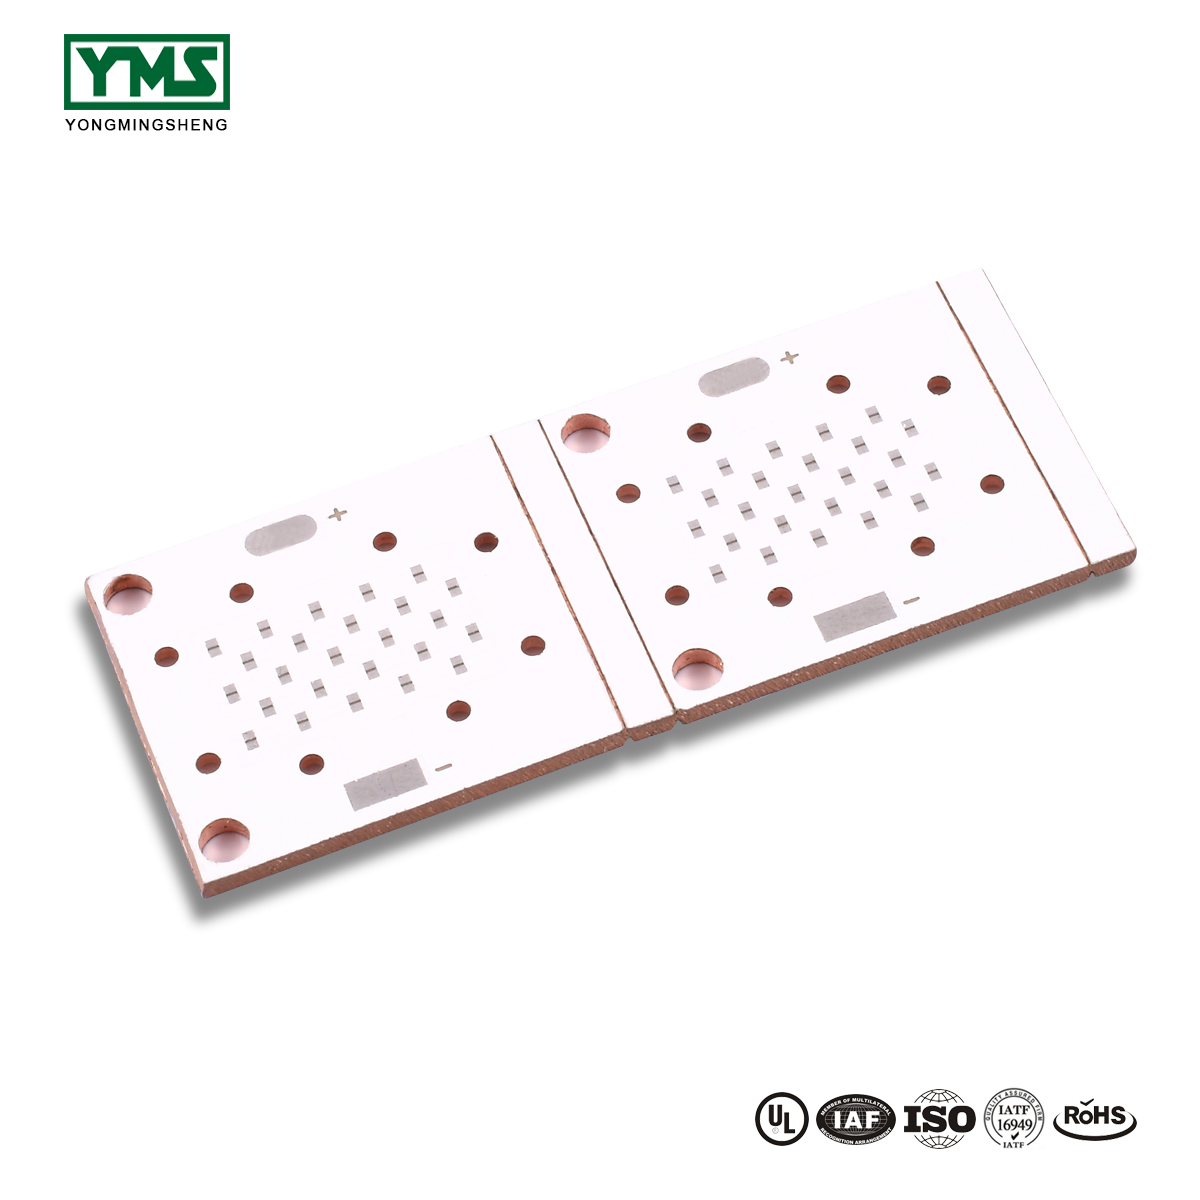 Massive Selection for Hearing Aids Printed Circuit Board - 1 Layer Thermoelectric Copper base Board | YMSPCB – Yongmingsheng